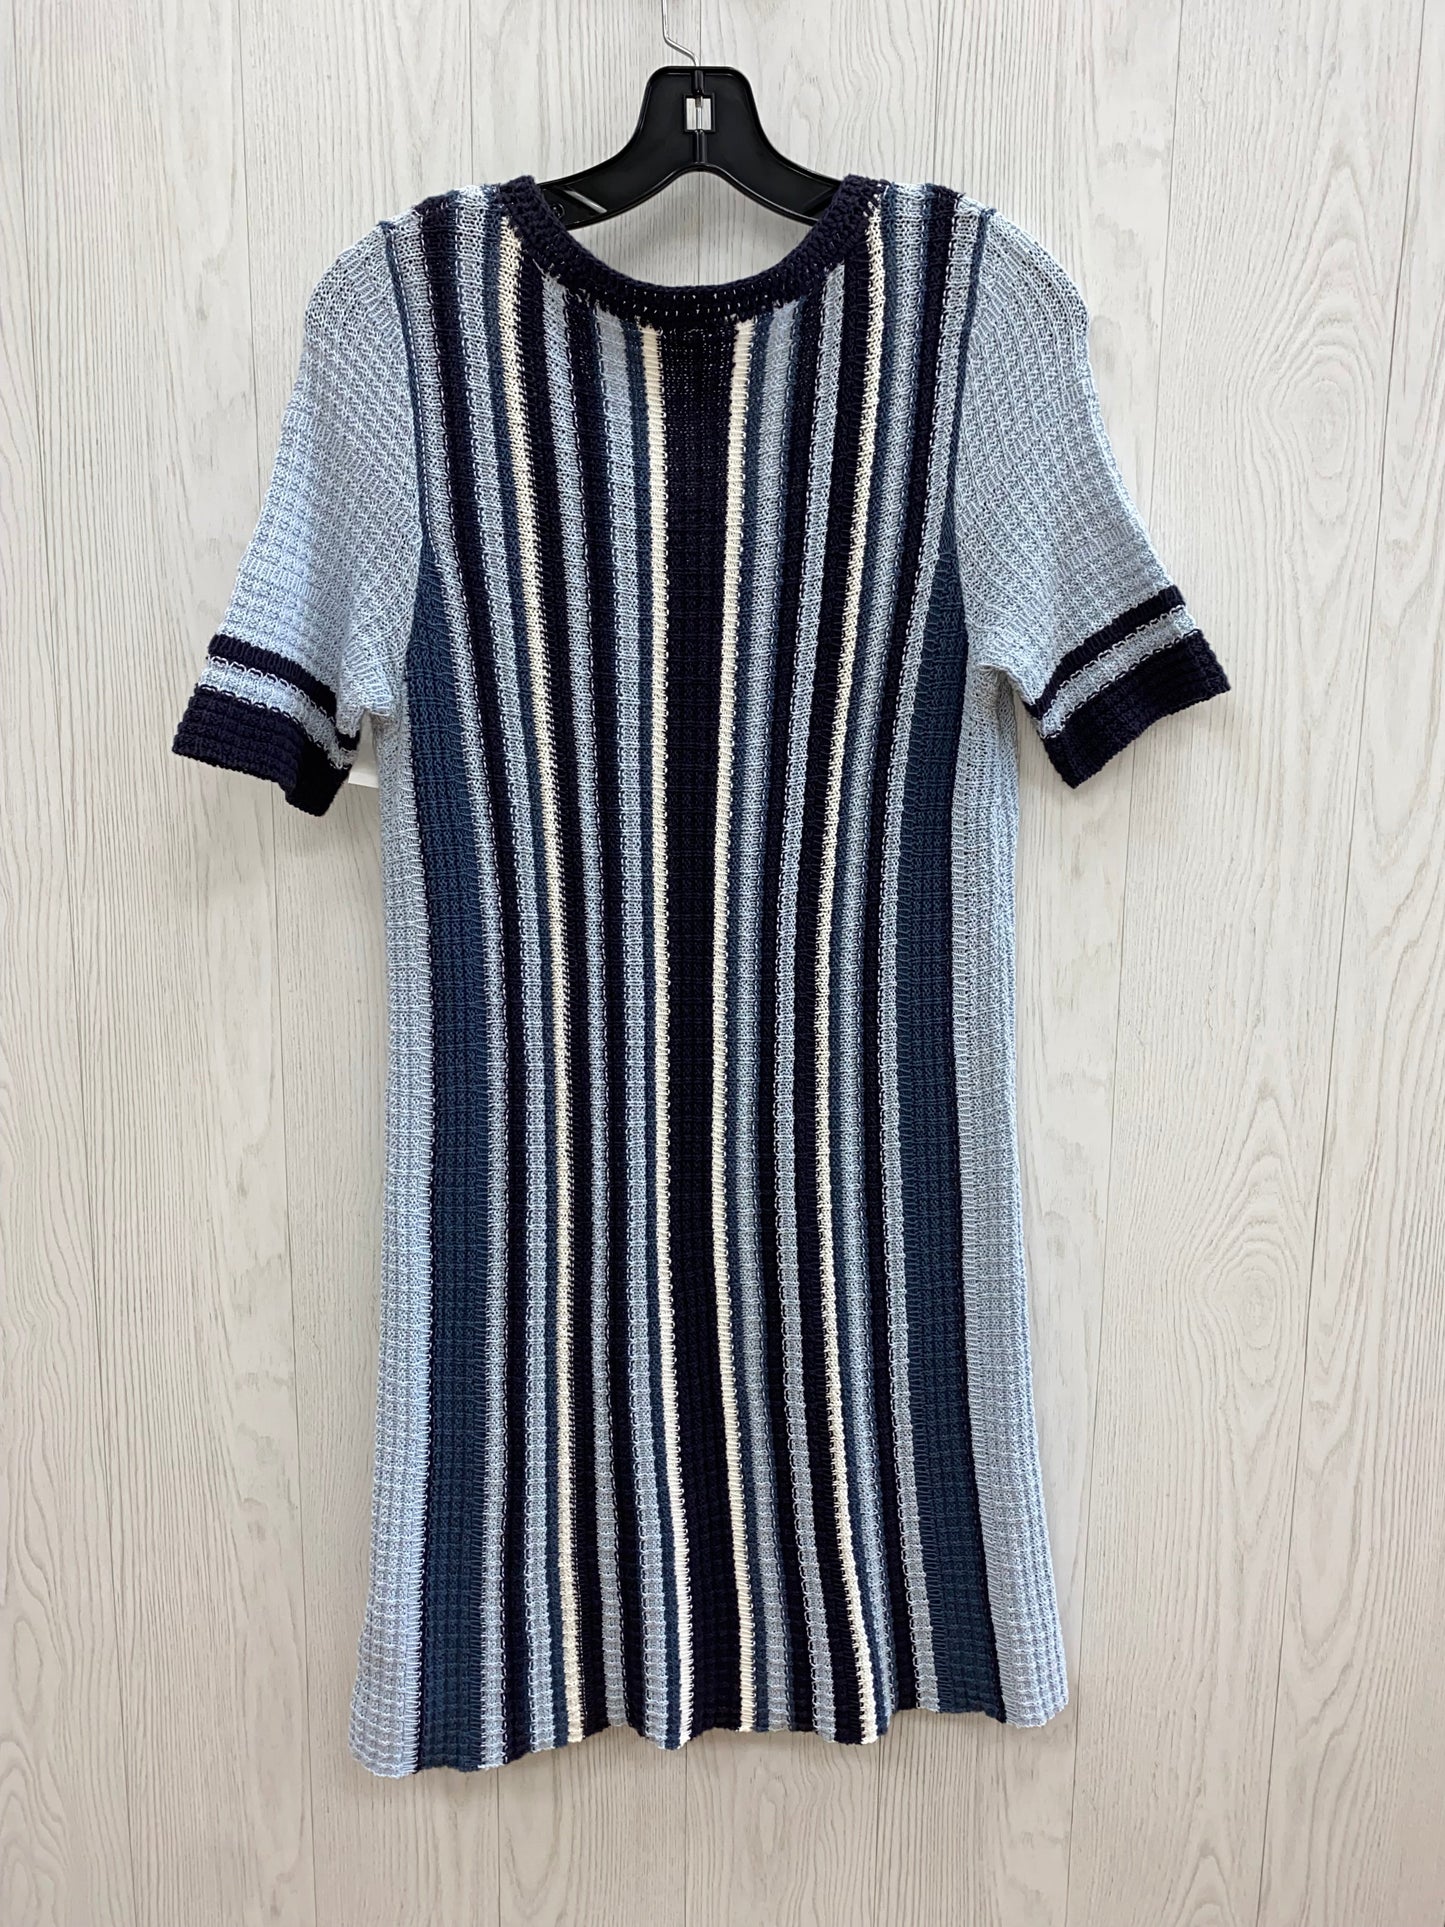 Blue Dress Casual Short Free People, Size S